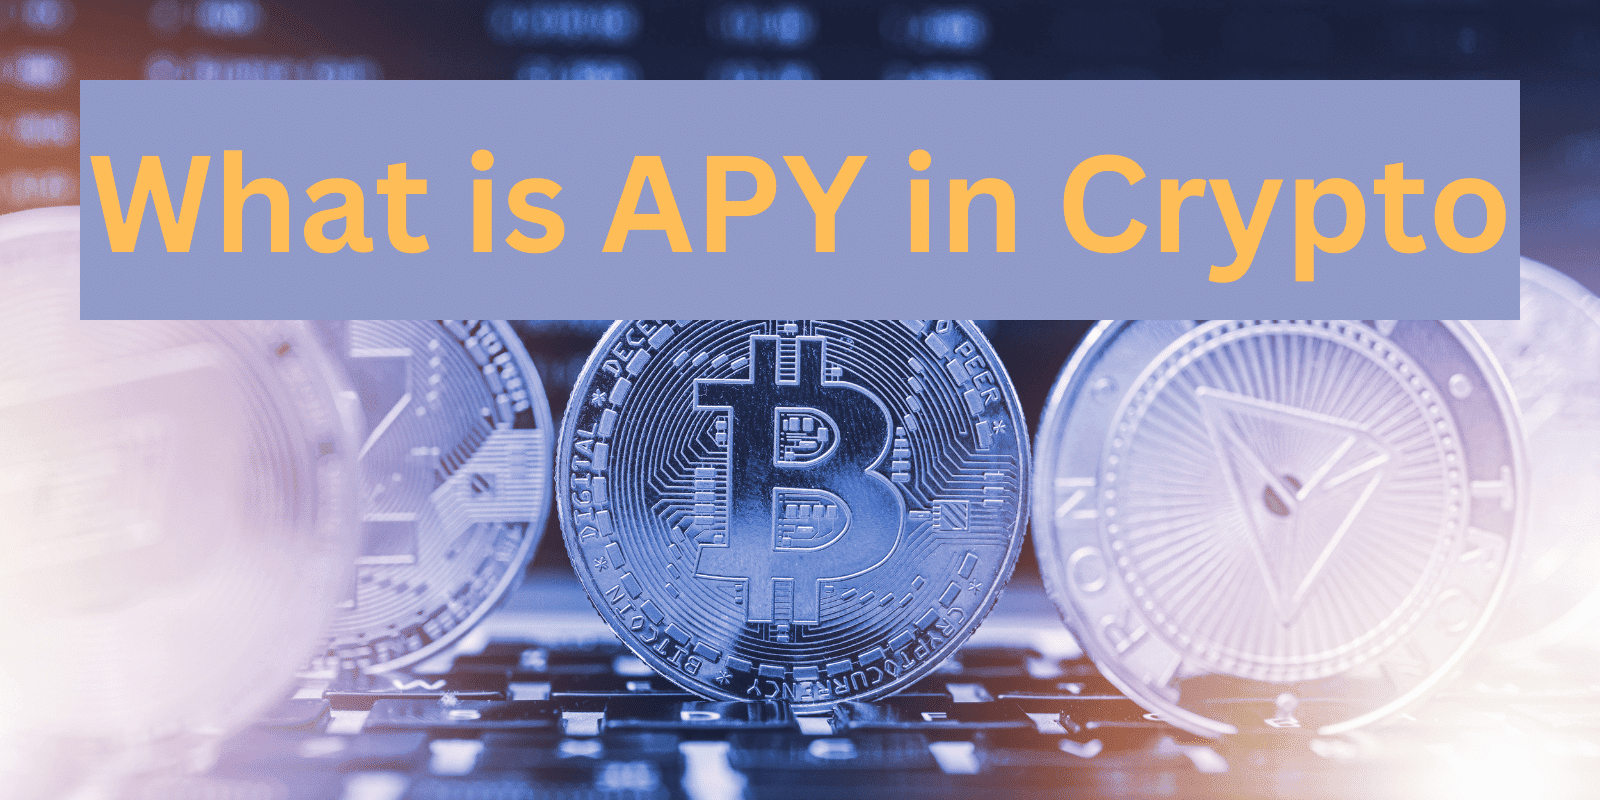 What does apy mean in crypto